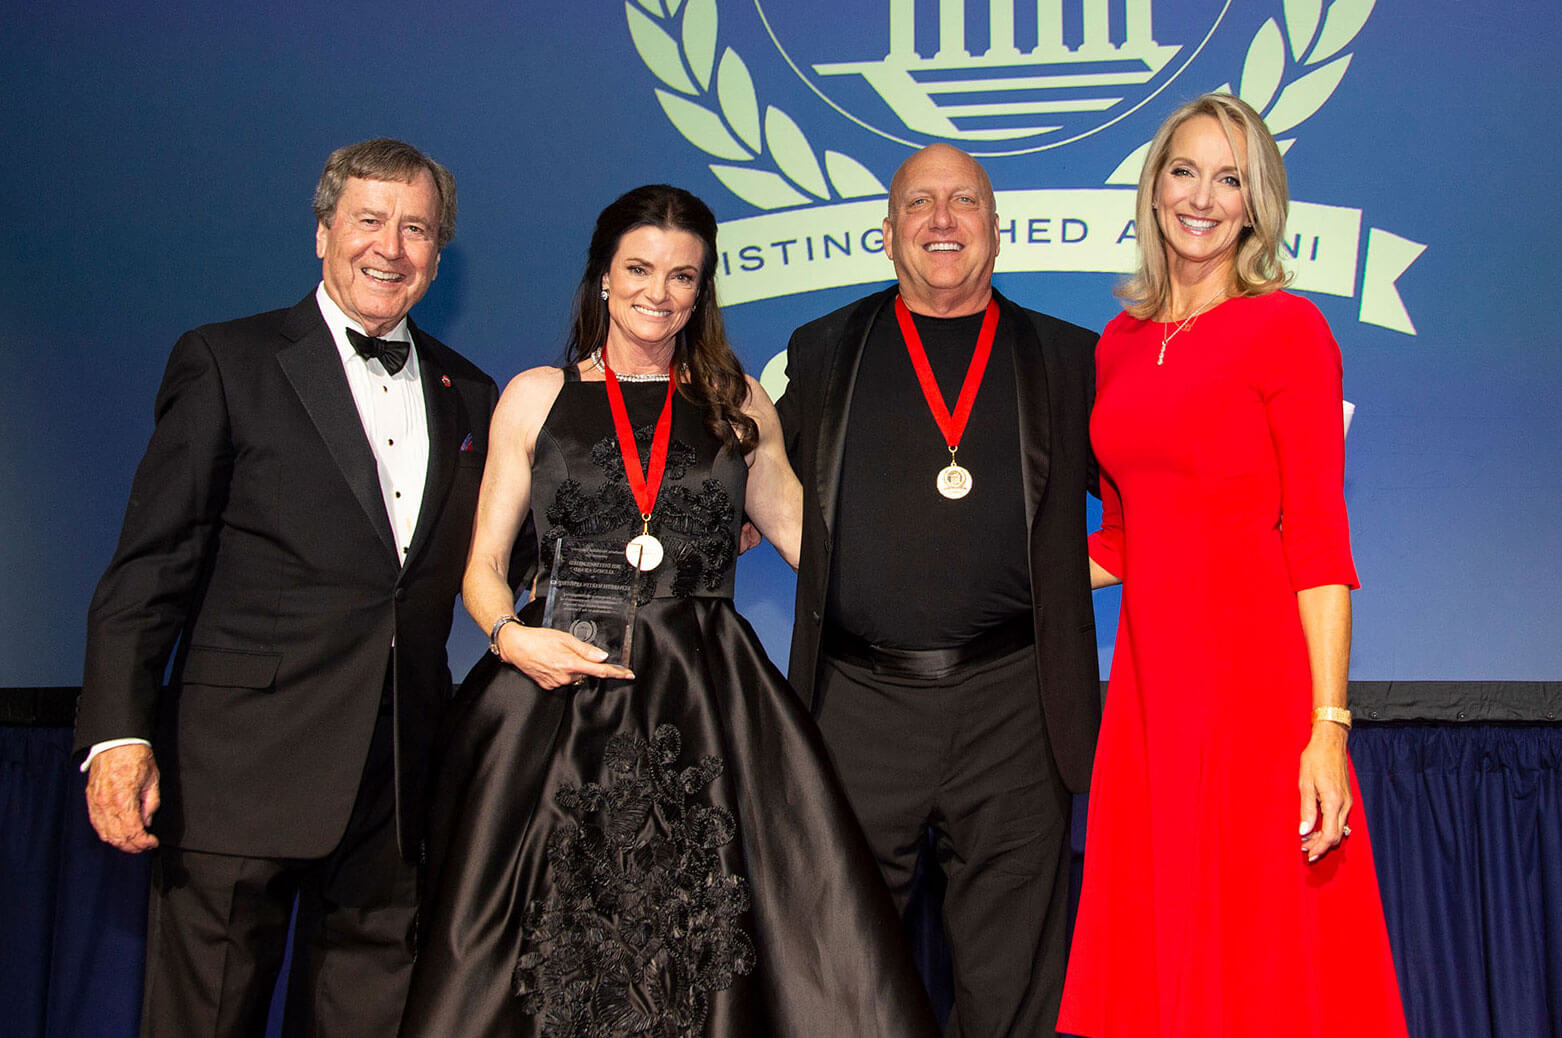 Kristin Henderson (right) with R. Gerald Turner, Liz Armstrong and Bill Armstrong at the Distinguished Alumni Awards